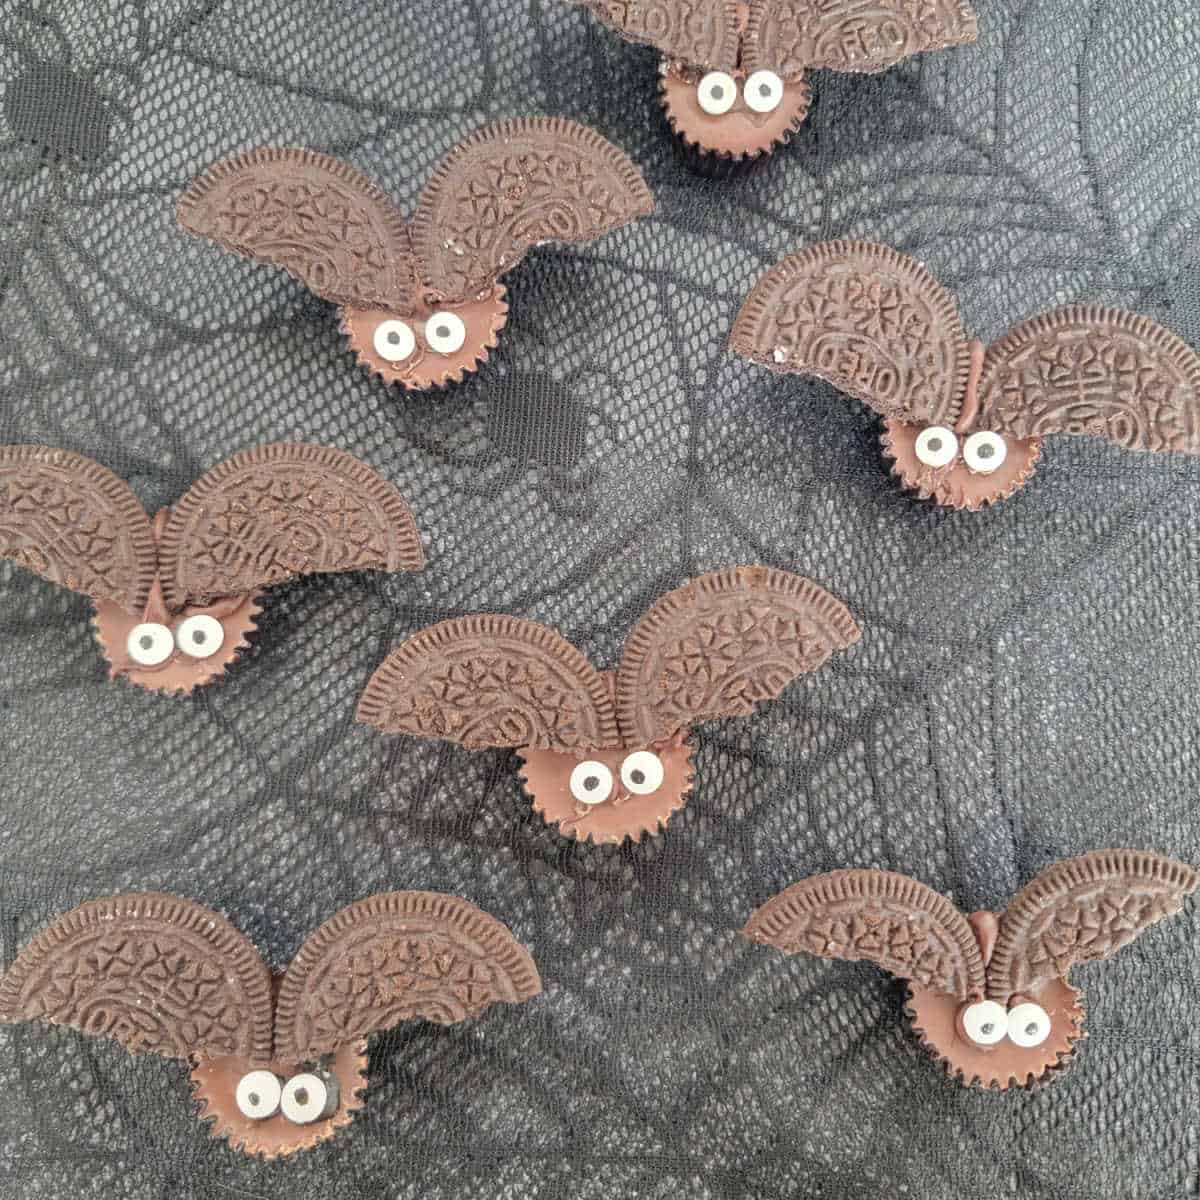 Reeses Bats on a spiderweb pattern